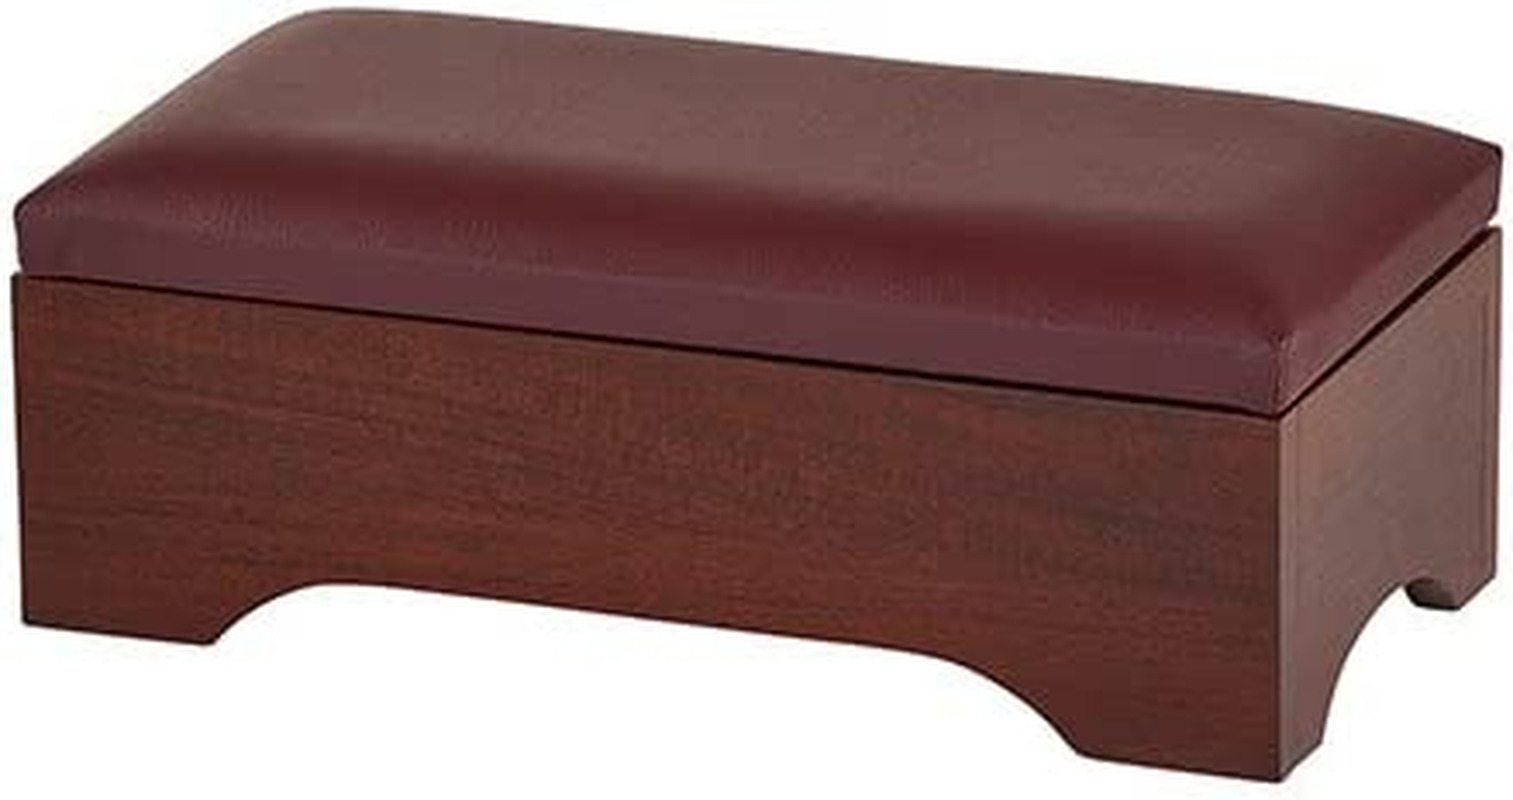 YC790 Personal Kneeler with Storage, Maple